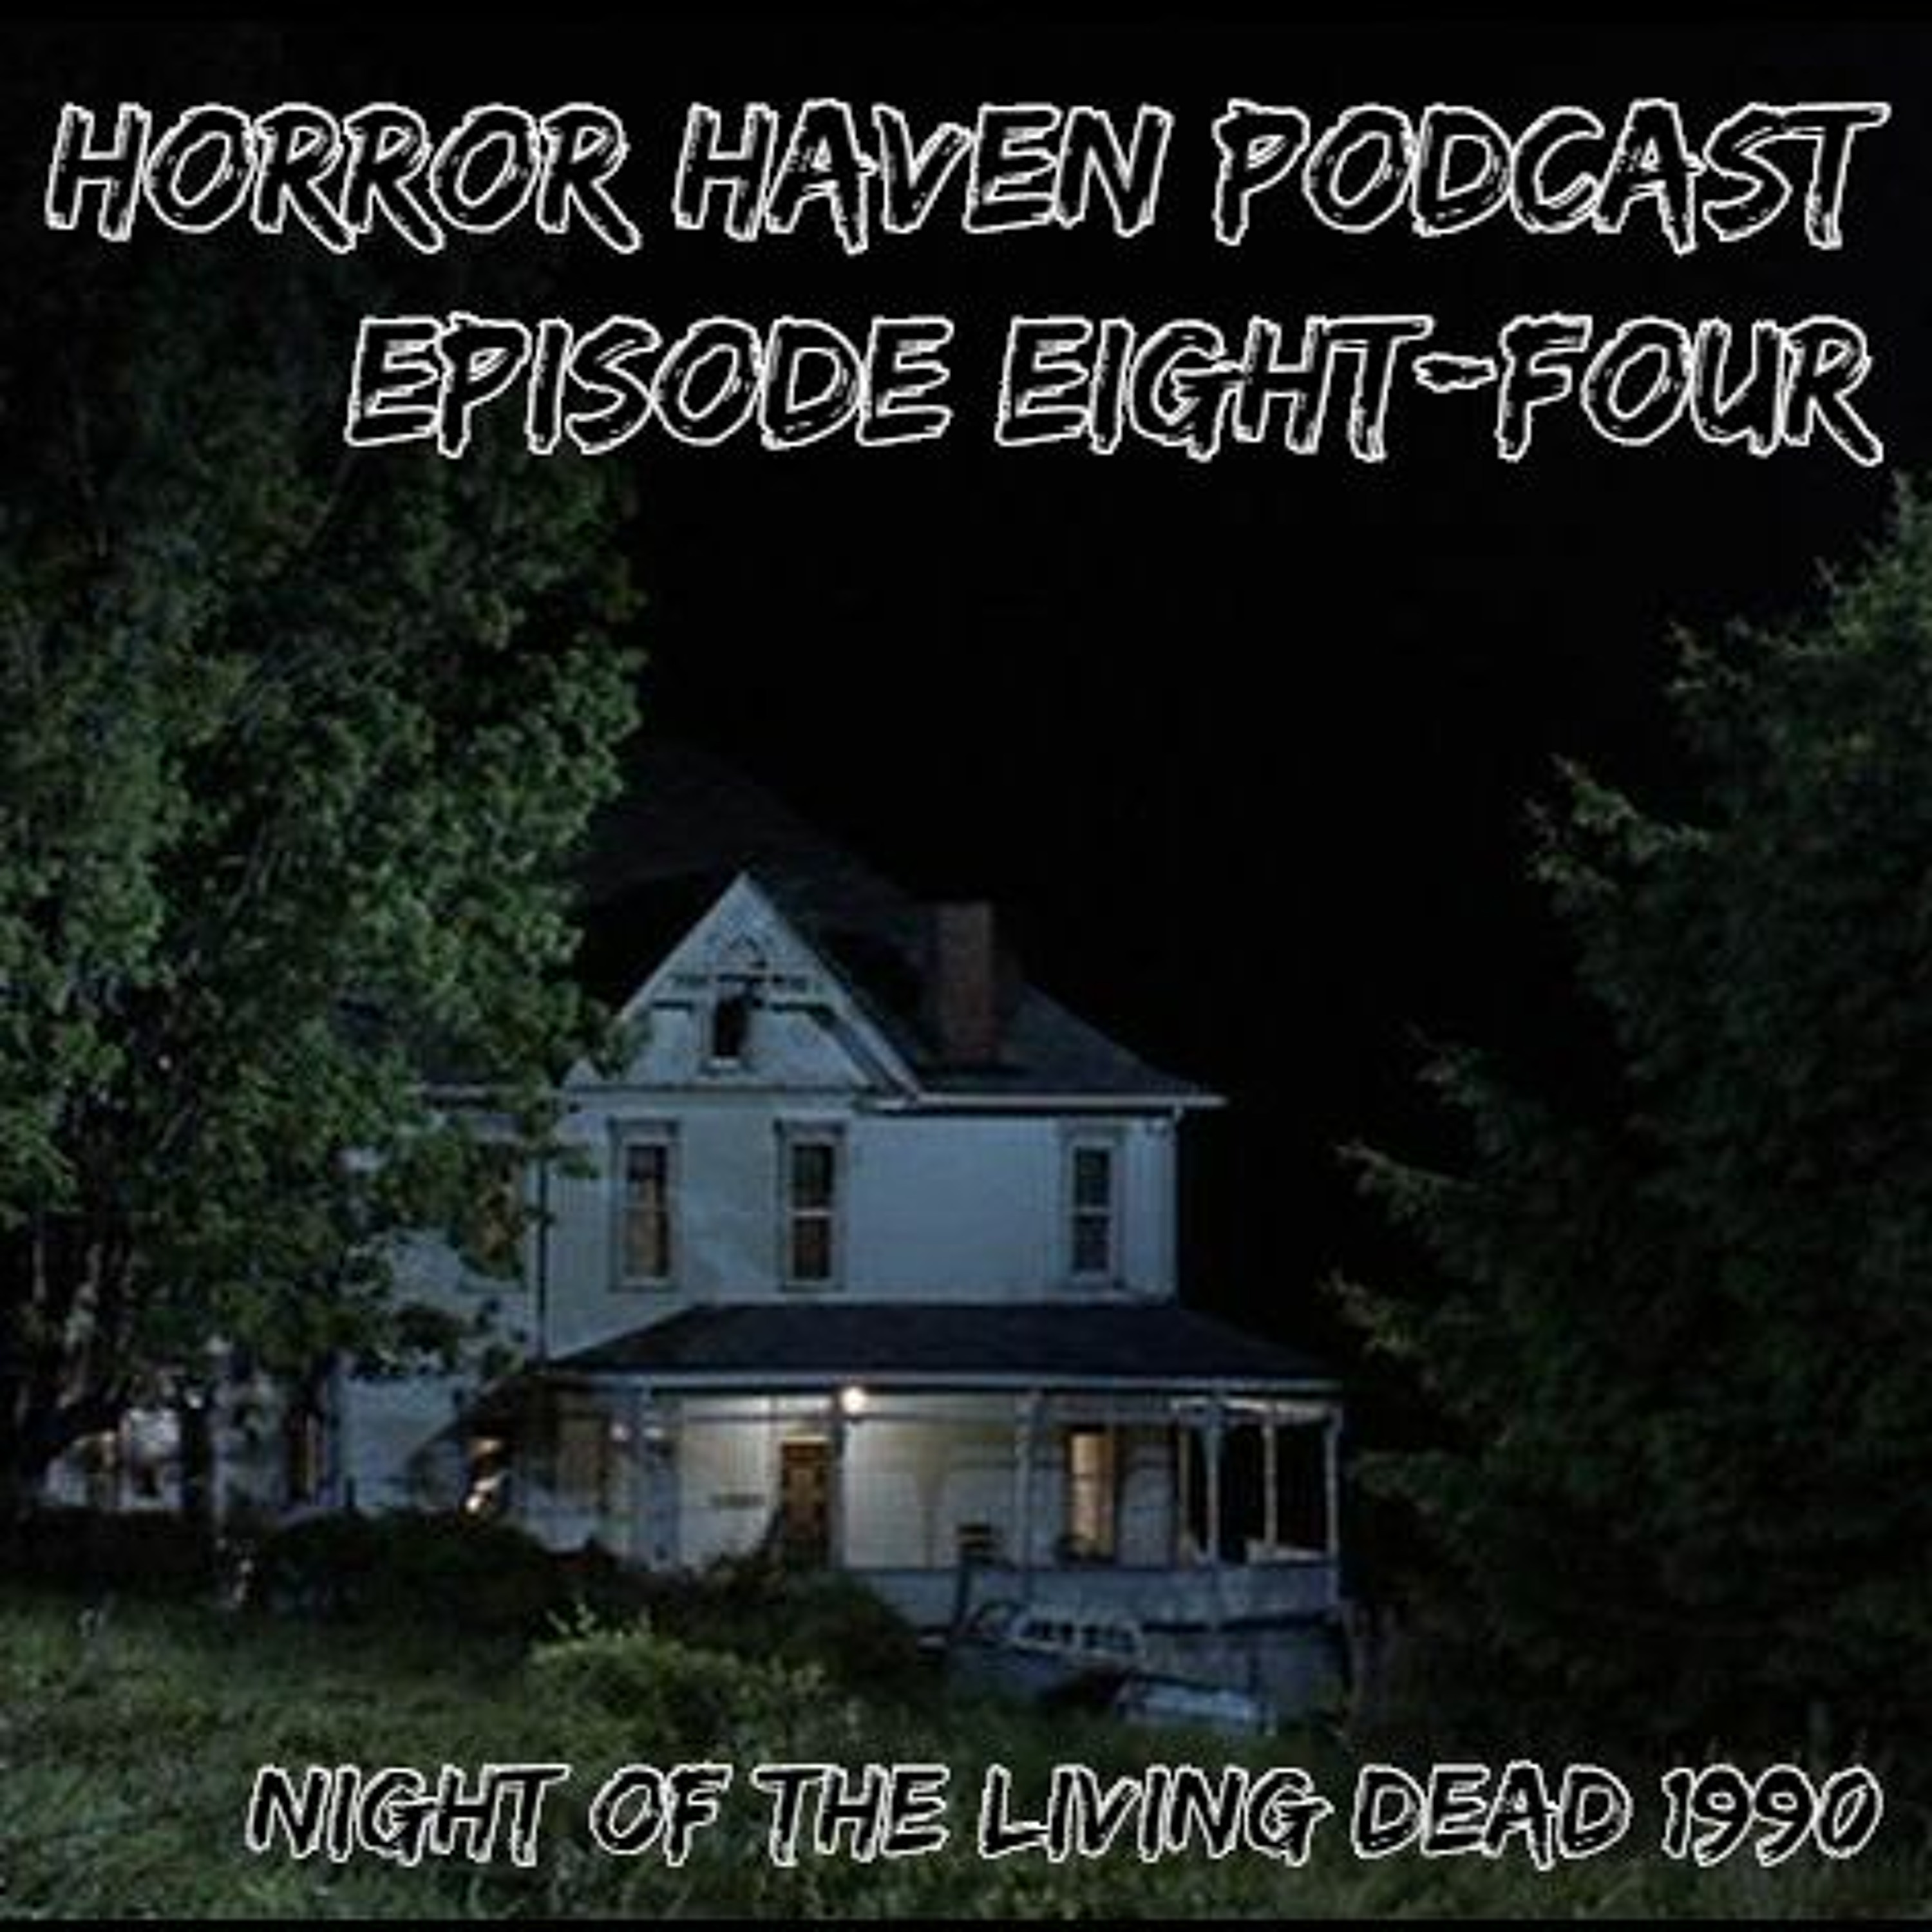 Episode Eighty-Four:  Night of the Living Dead (1990)